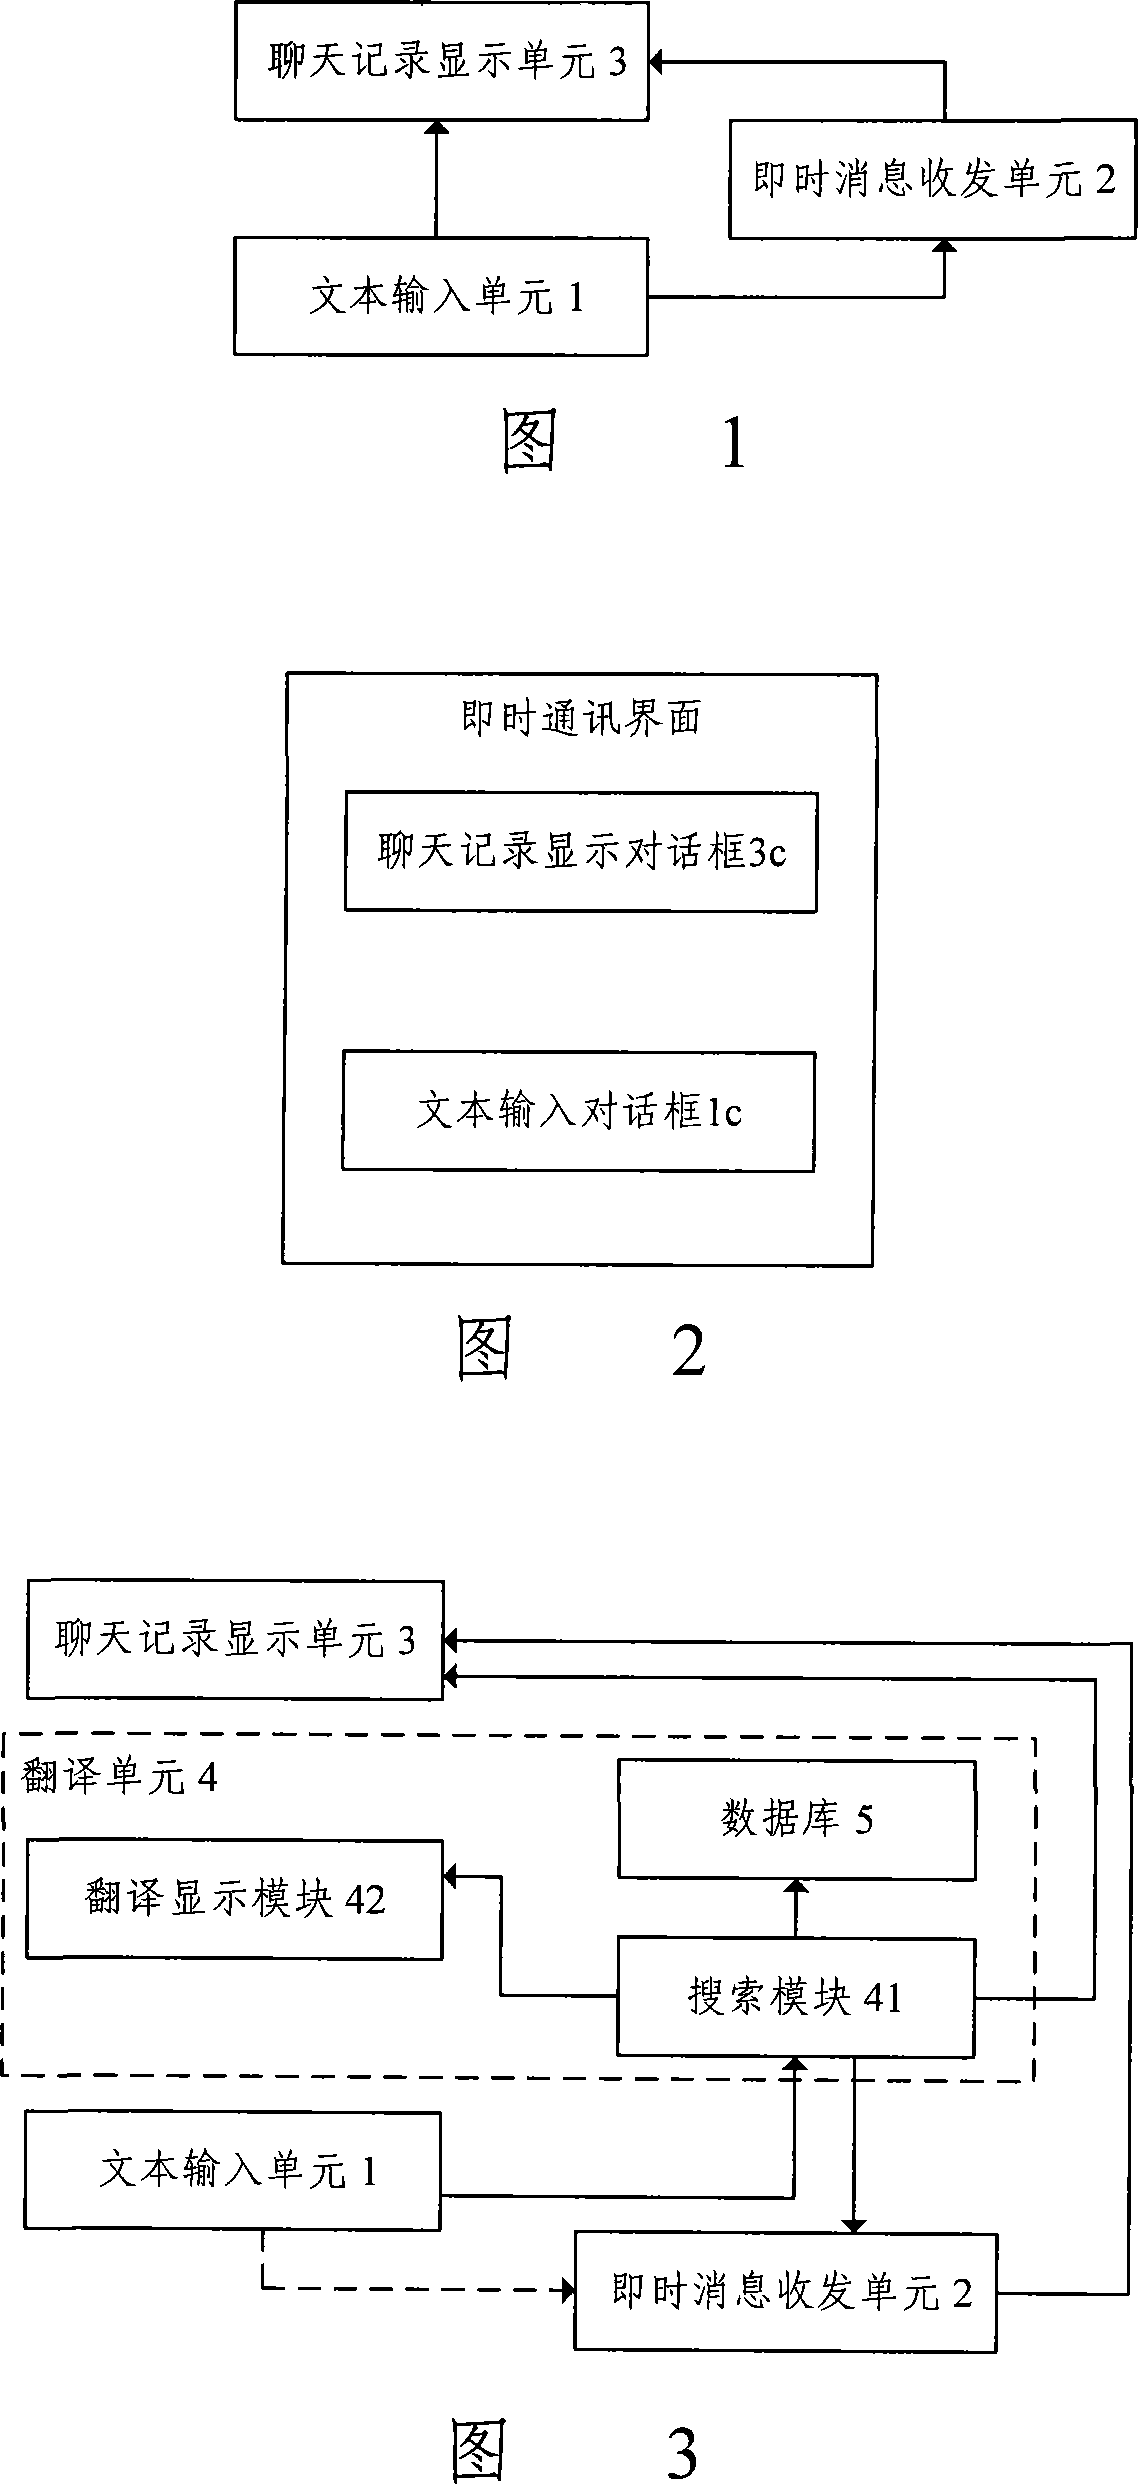 Multi-language instant communication terminal and its system and method